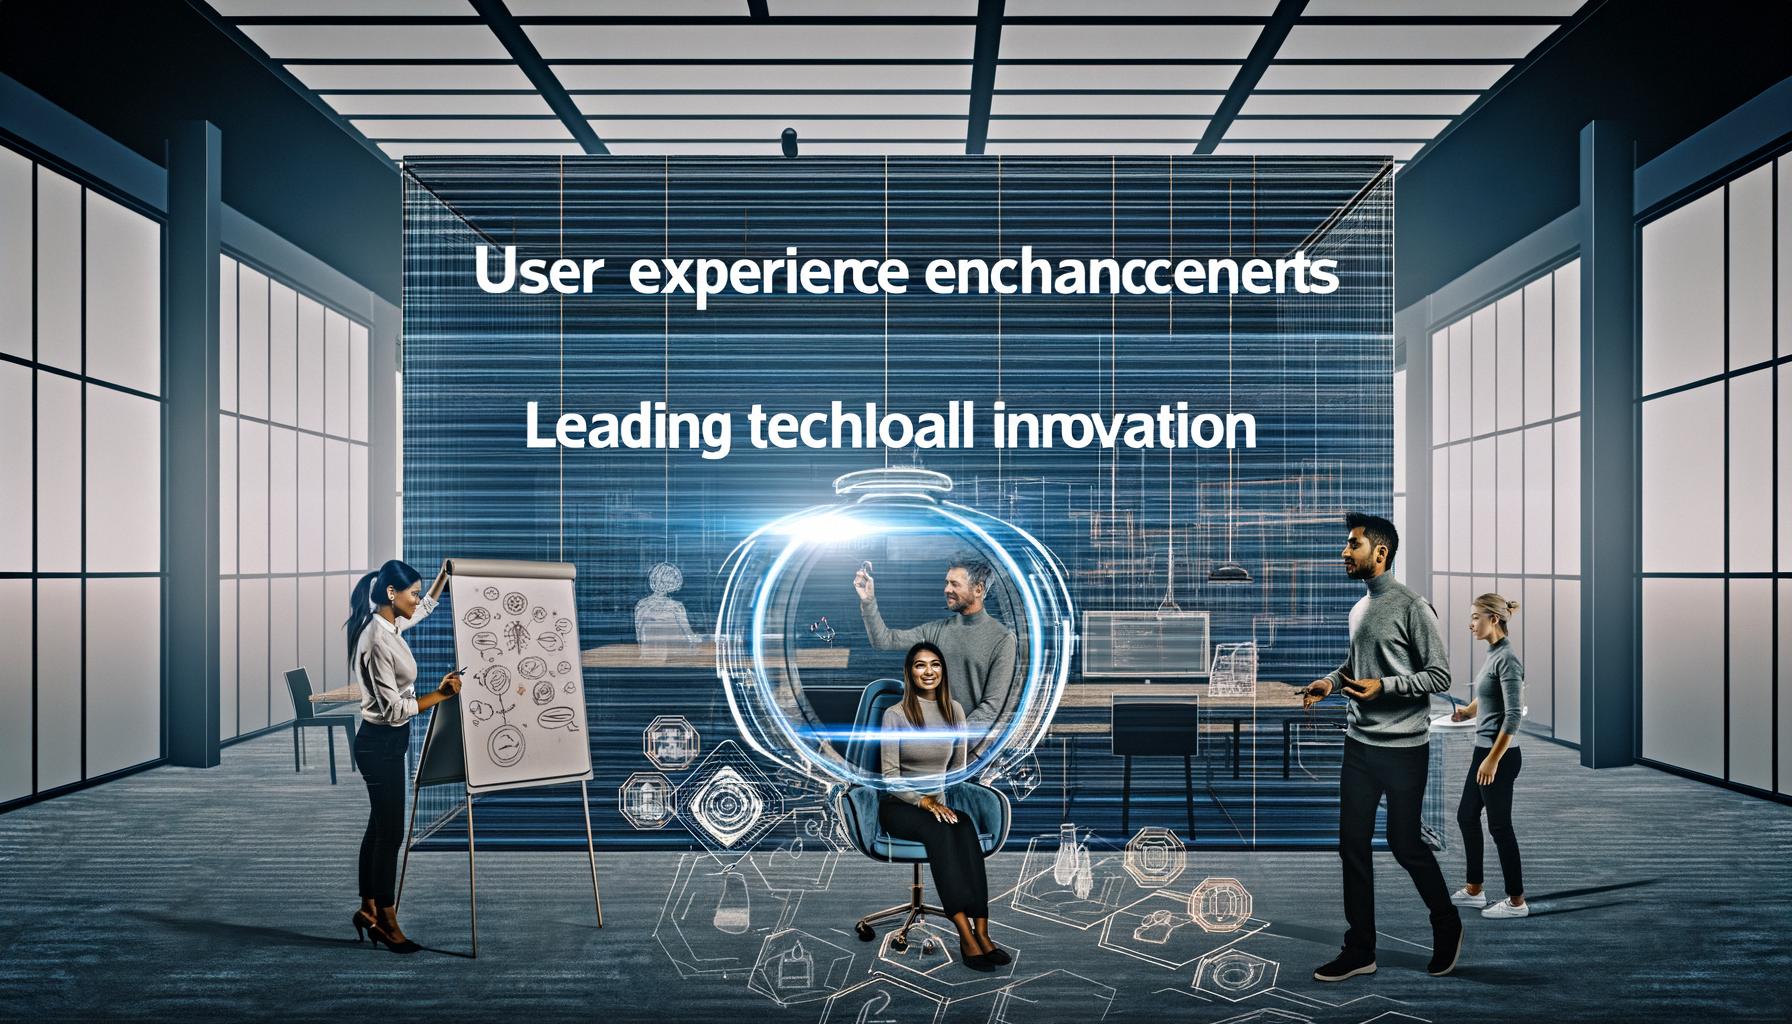 User experience enhancements lead tech innovation